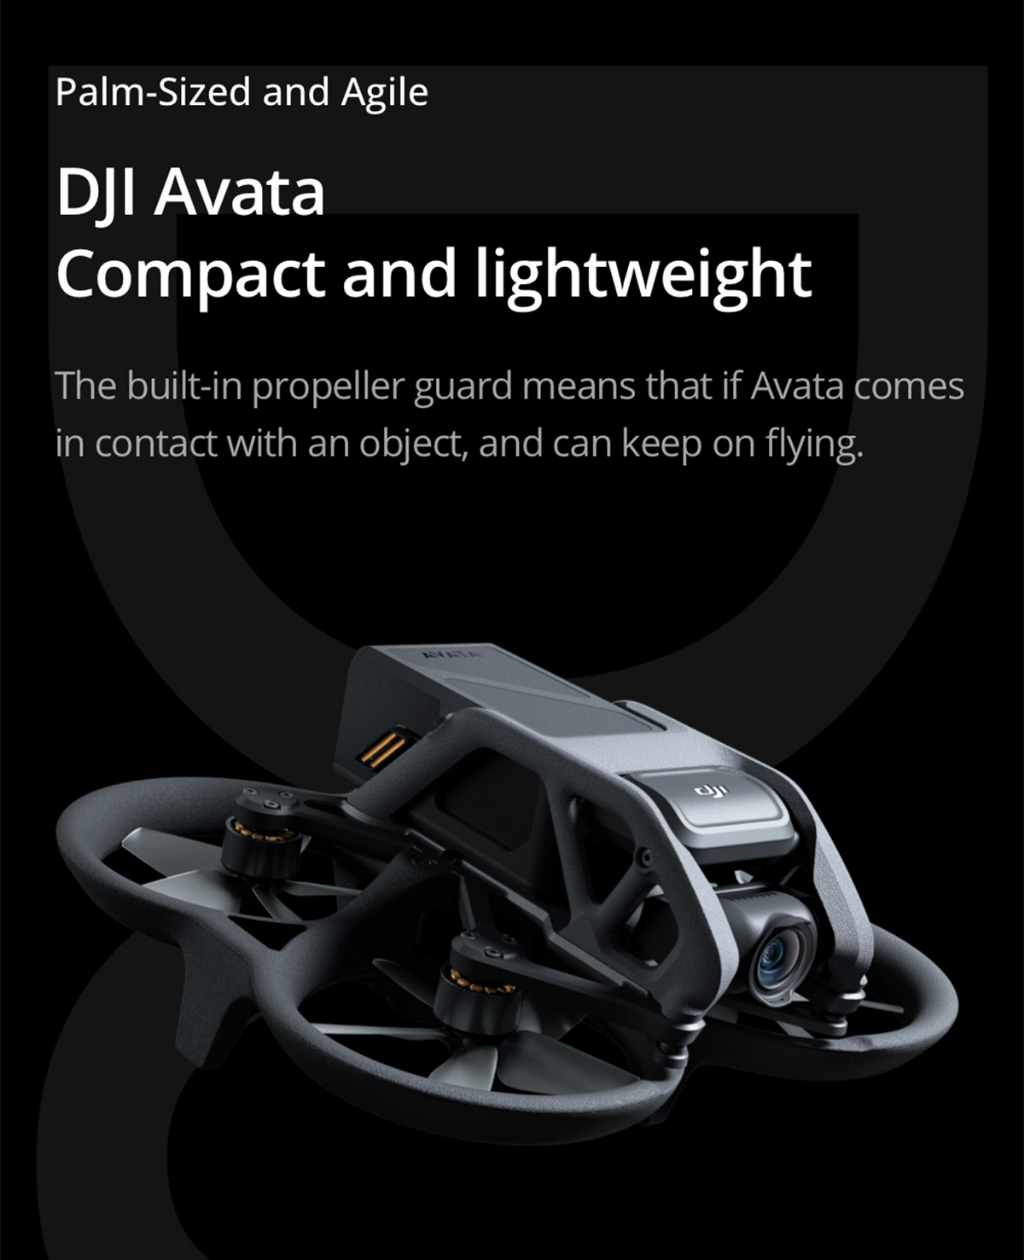 DJI Avata - the new FPV drone with built-in propeller guards